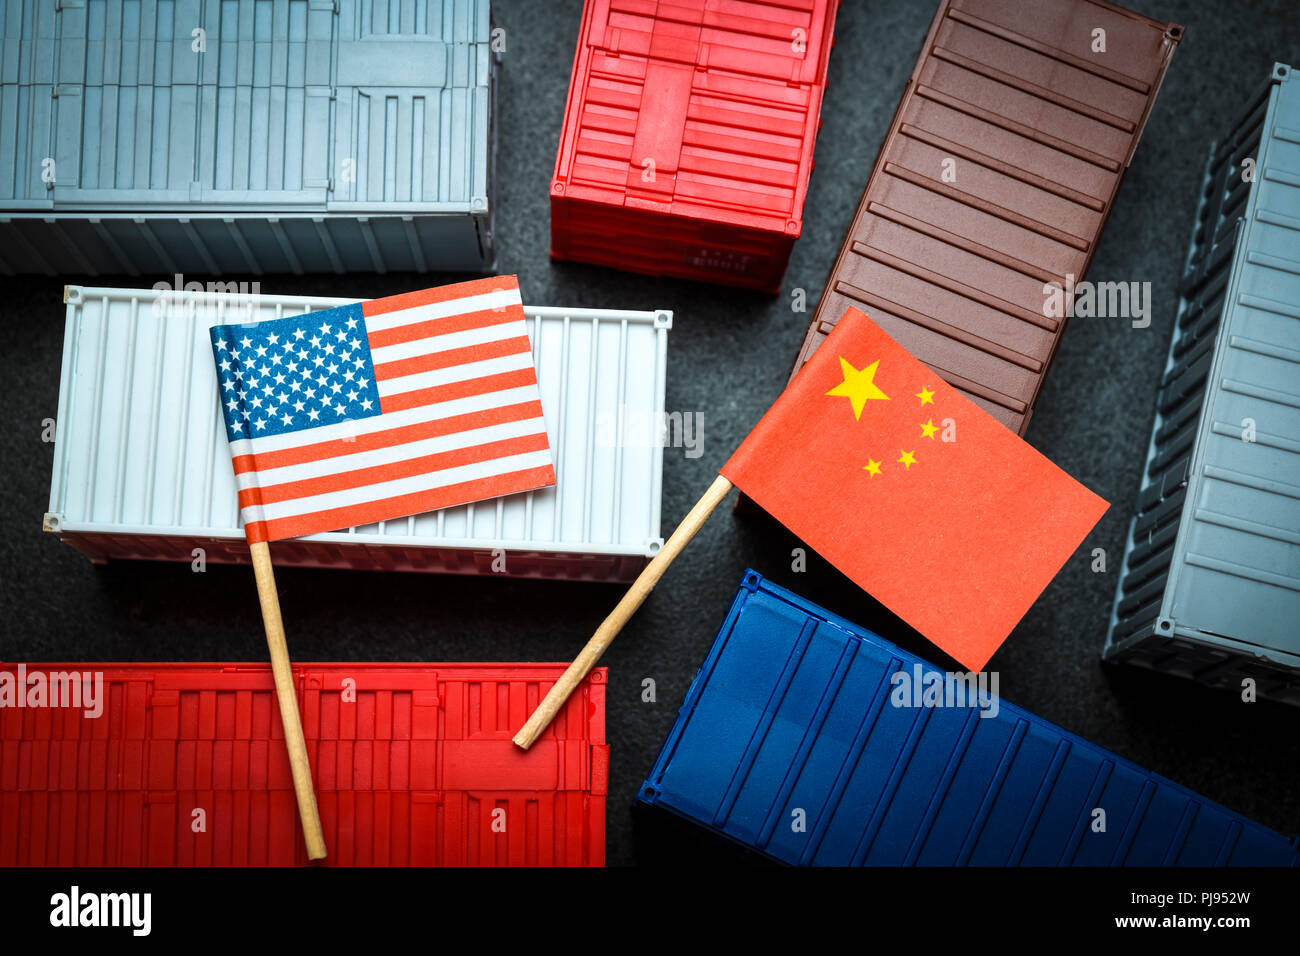 Flags of China and the USA on containers, symbolic photo commercial war, Fahnen von China und USA auf Containern, Symbolfoto Handelskrieg Stock Photo